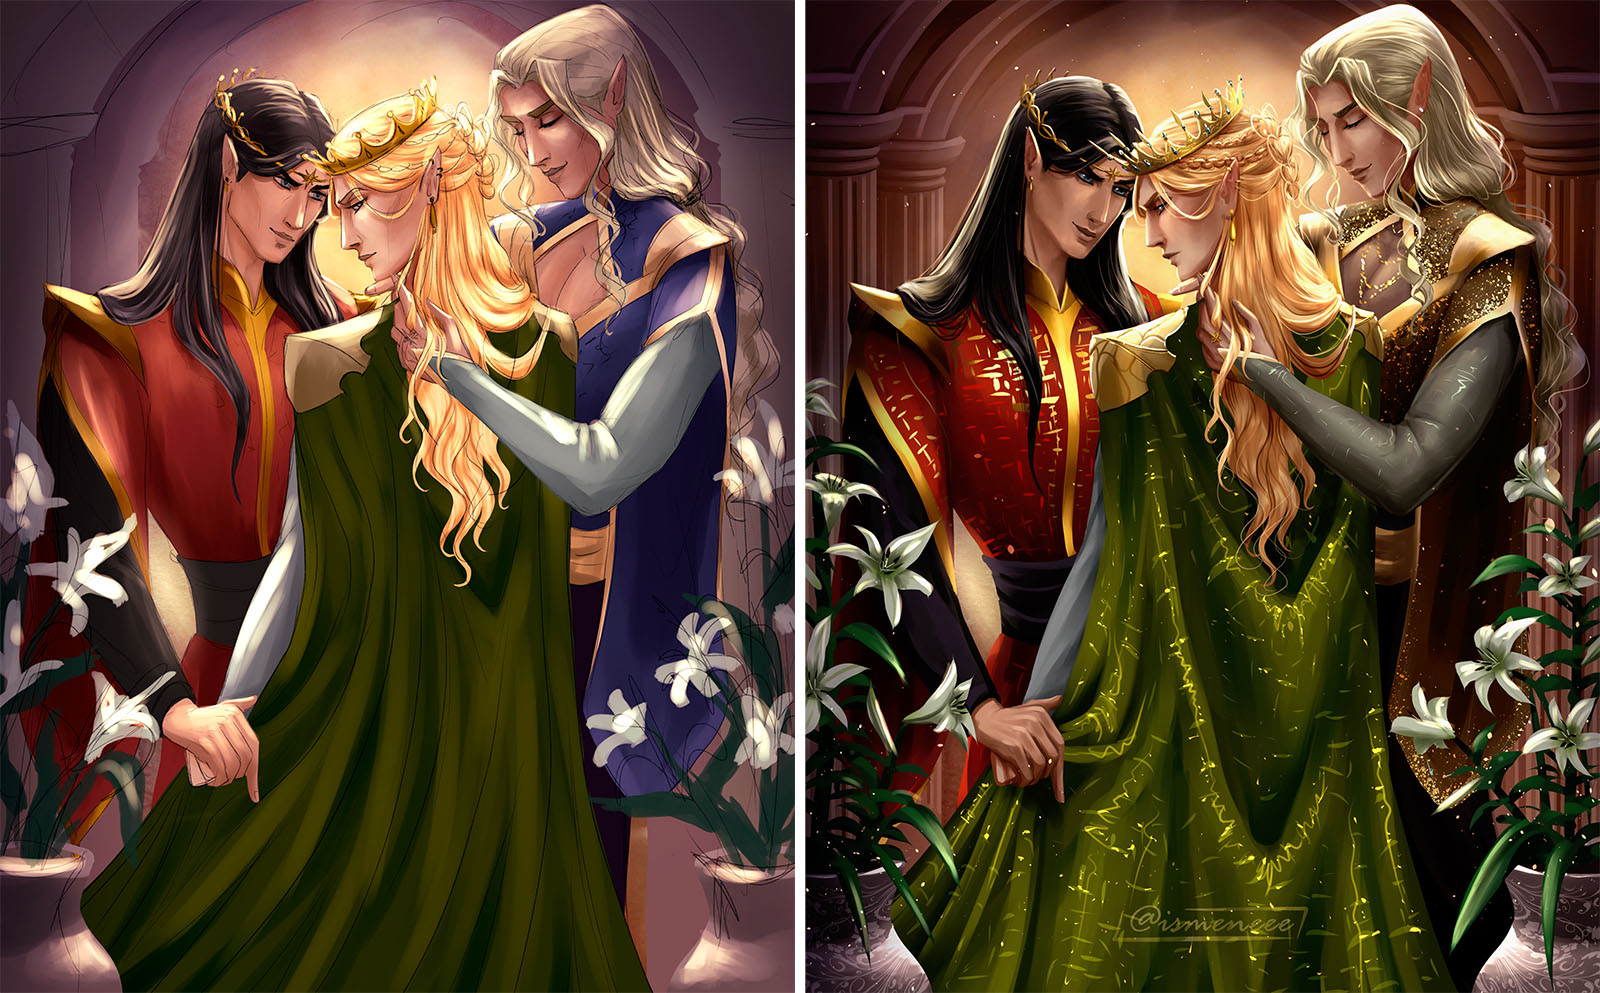 On Autumn's Pyre by Ismene. Left: half-finished drawing for TRSB 2022 with sketch on rough coloring; right: final rendering of On Autumn’s Pyre.